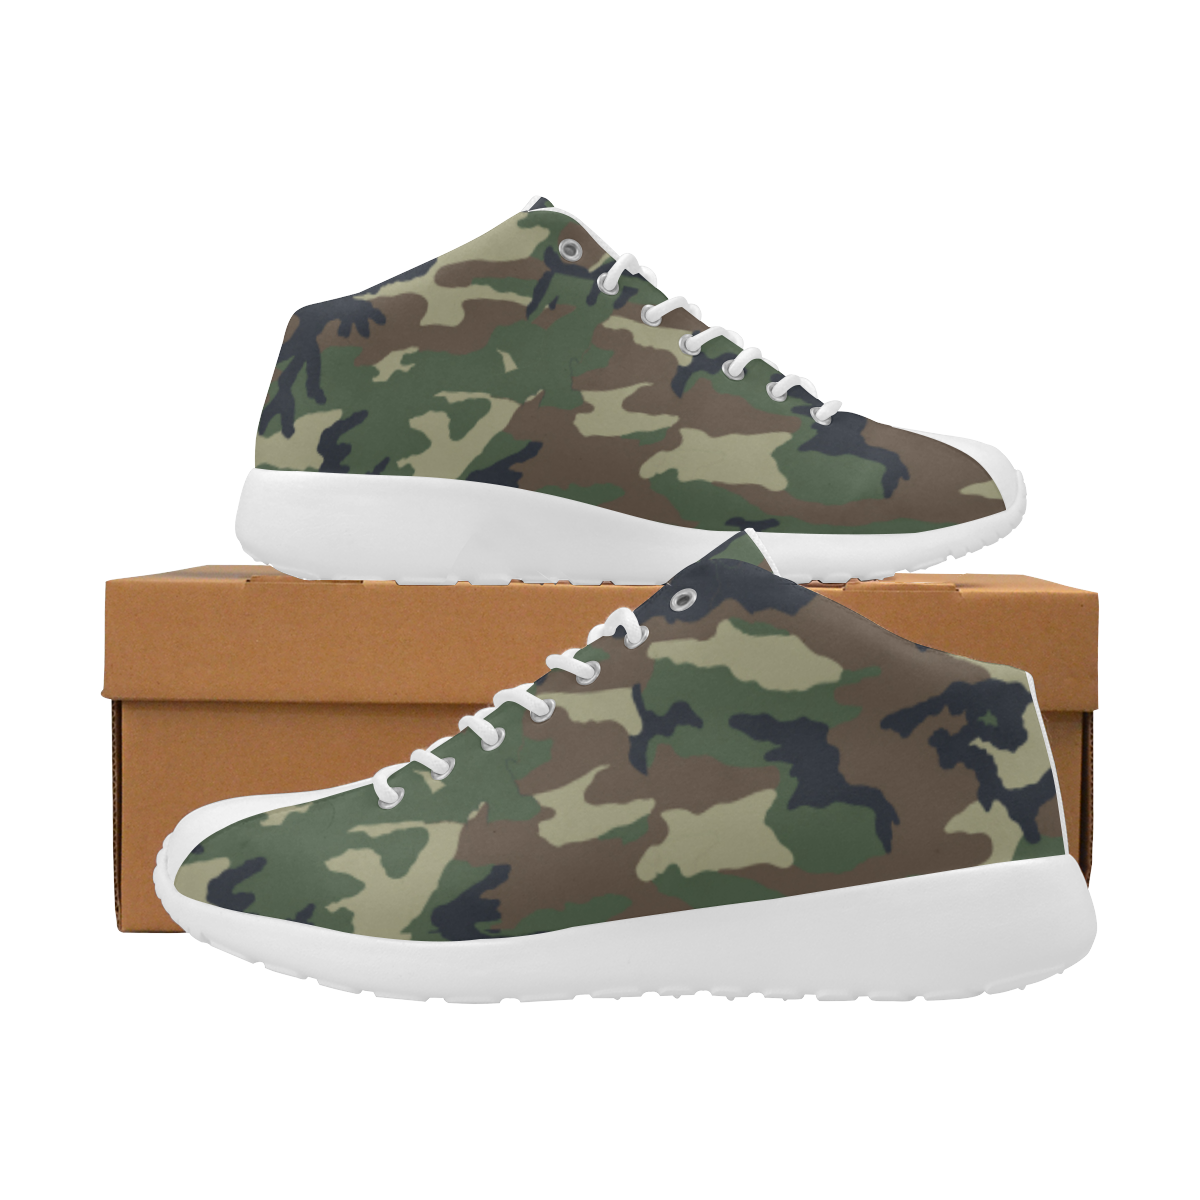 Woodland Forest Green Camouflage Men's Basketball Training Shoes (Model 47502)